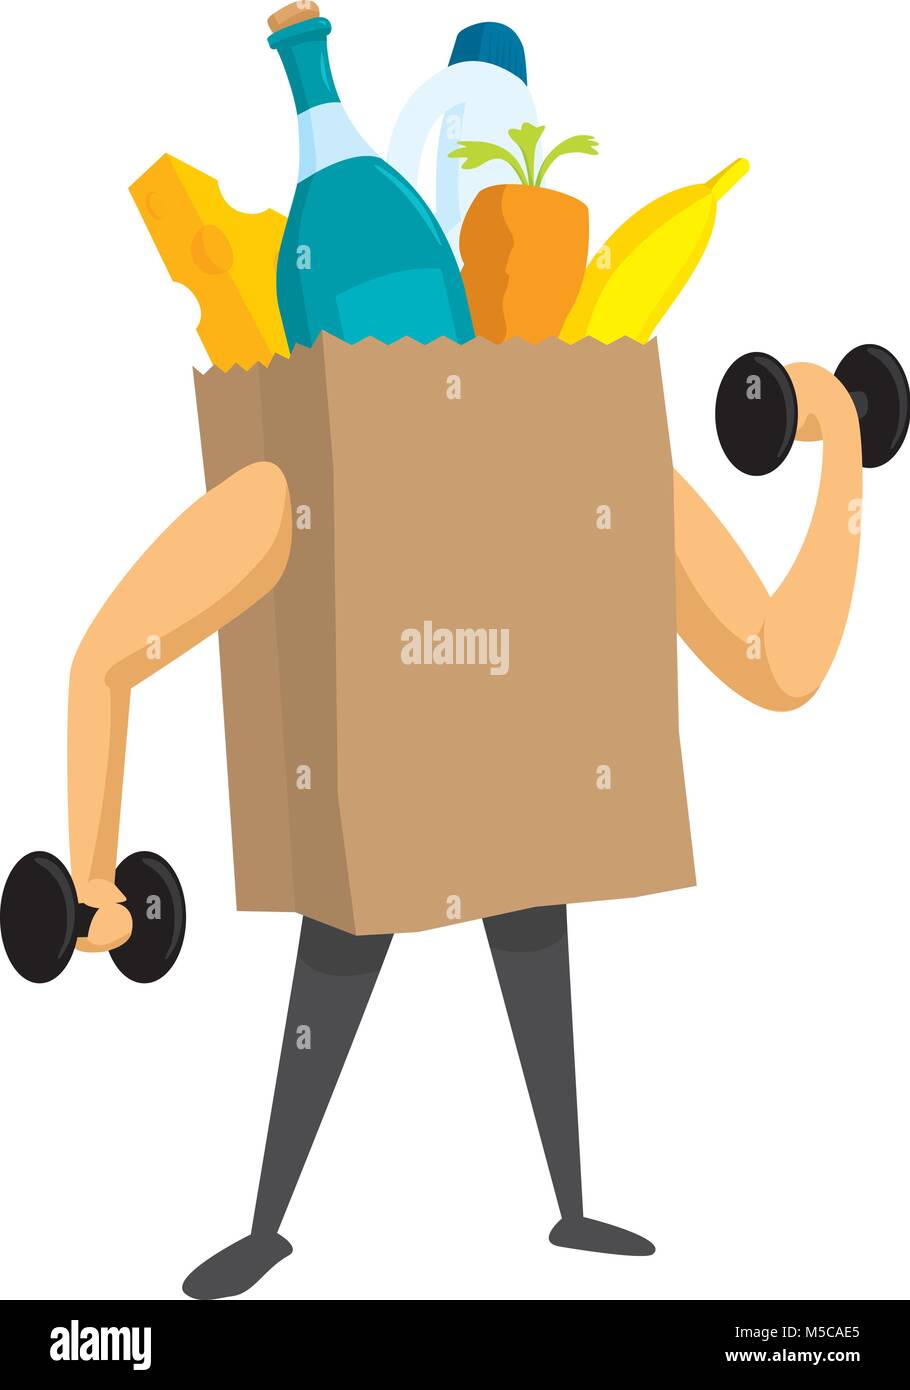 Cartoon illustration of groceries training with weights Stock Vector